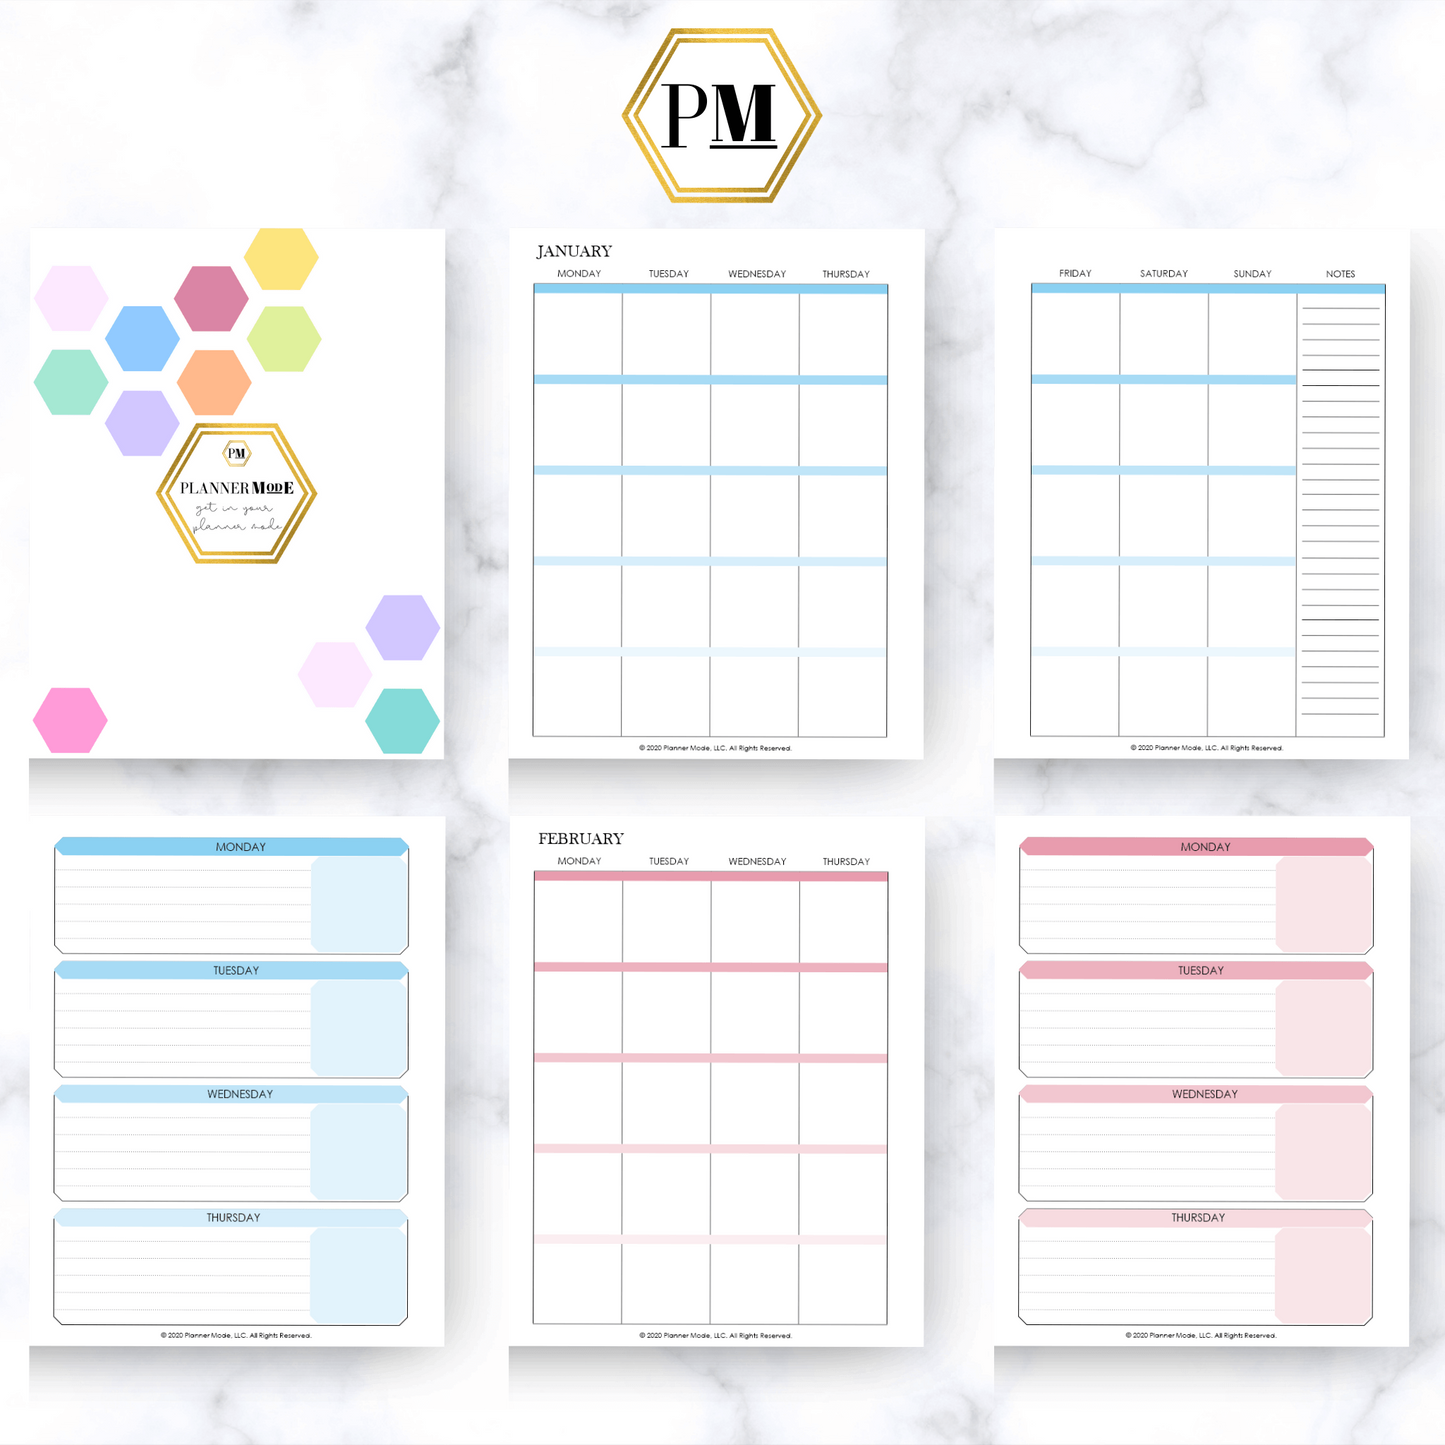 Colorful Hexagon Lifestyle Mode Planner